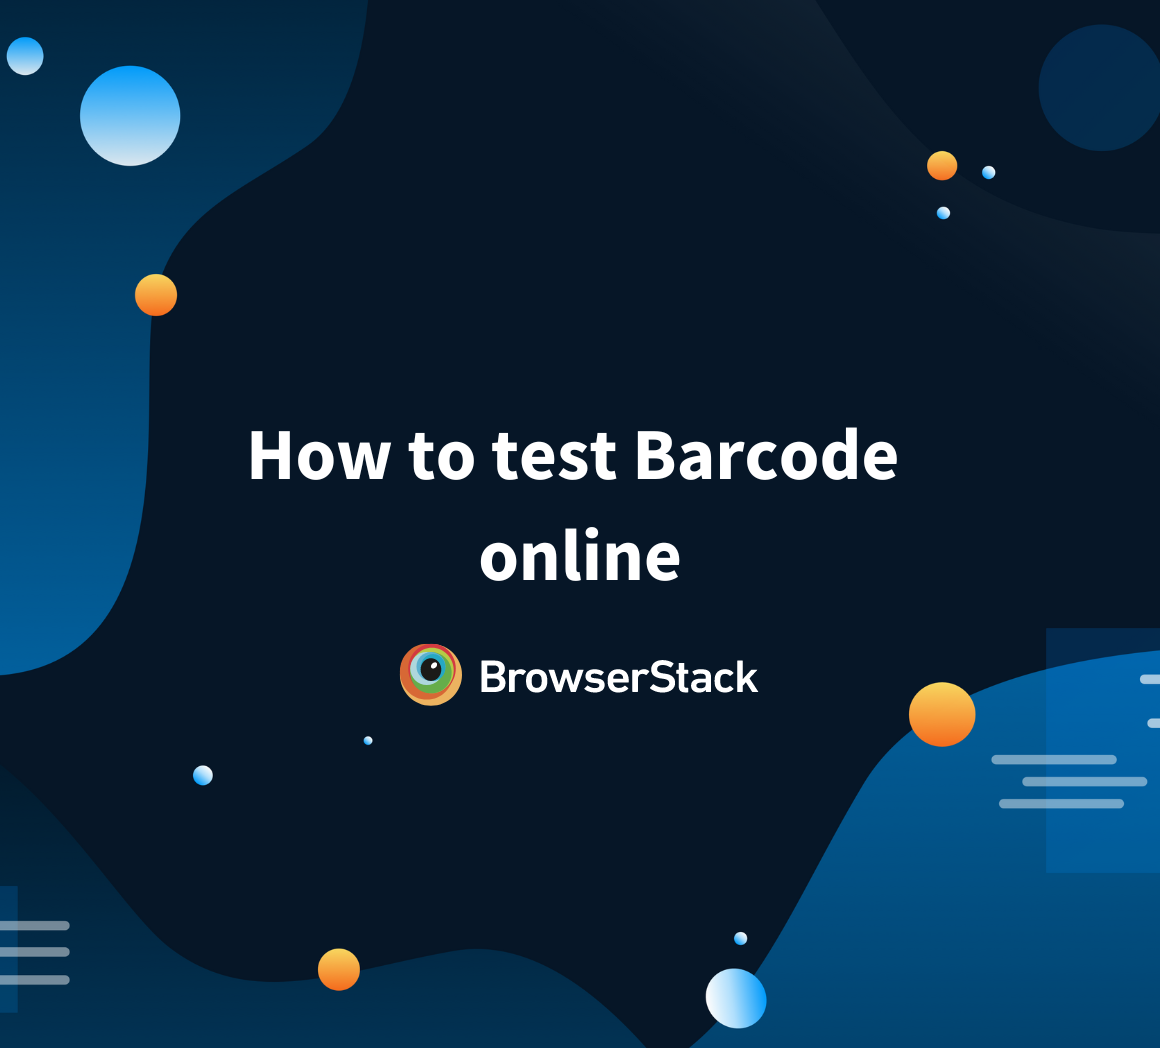 How to test Barcode online